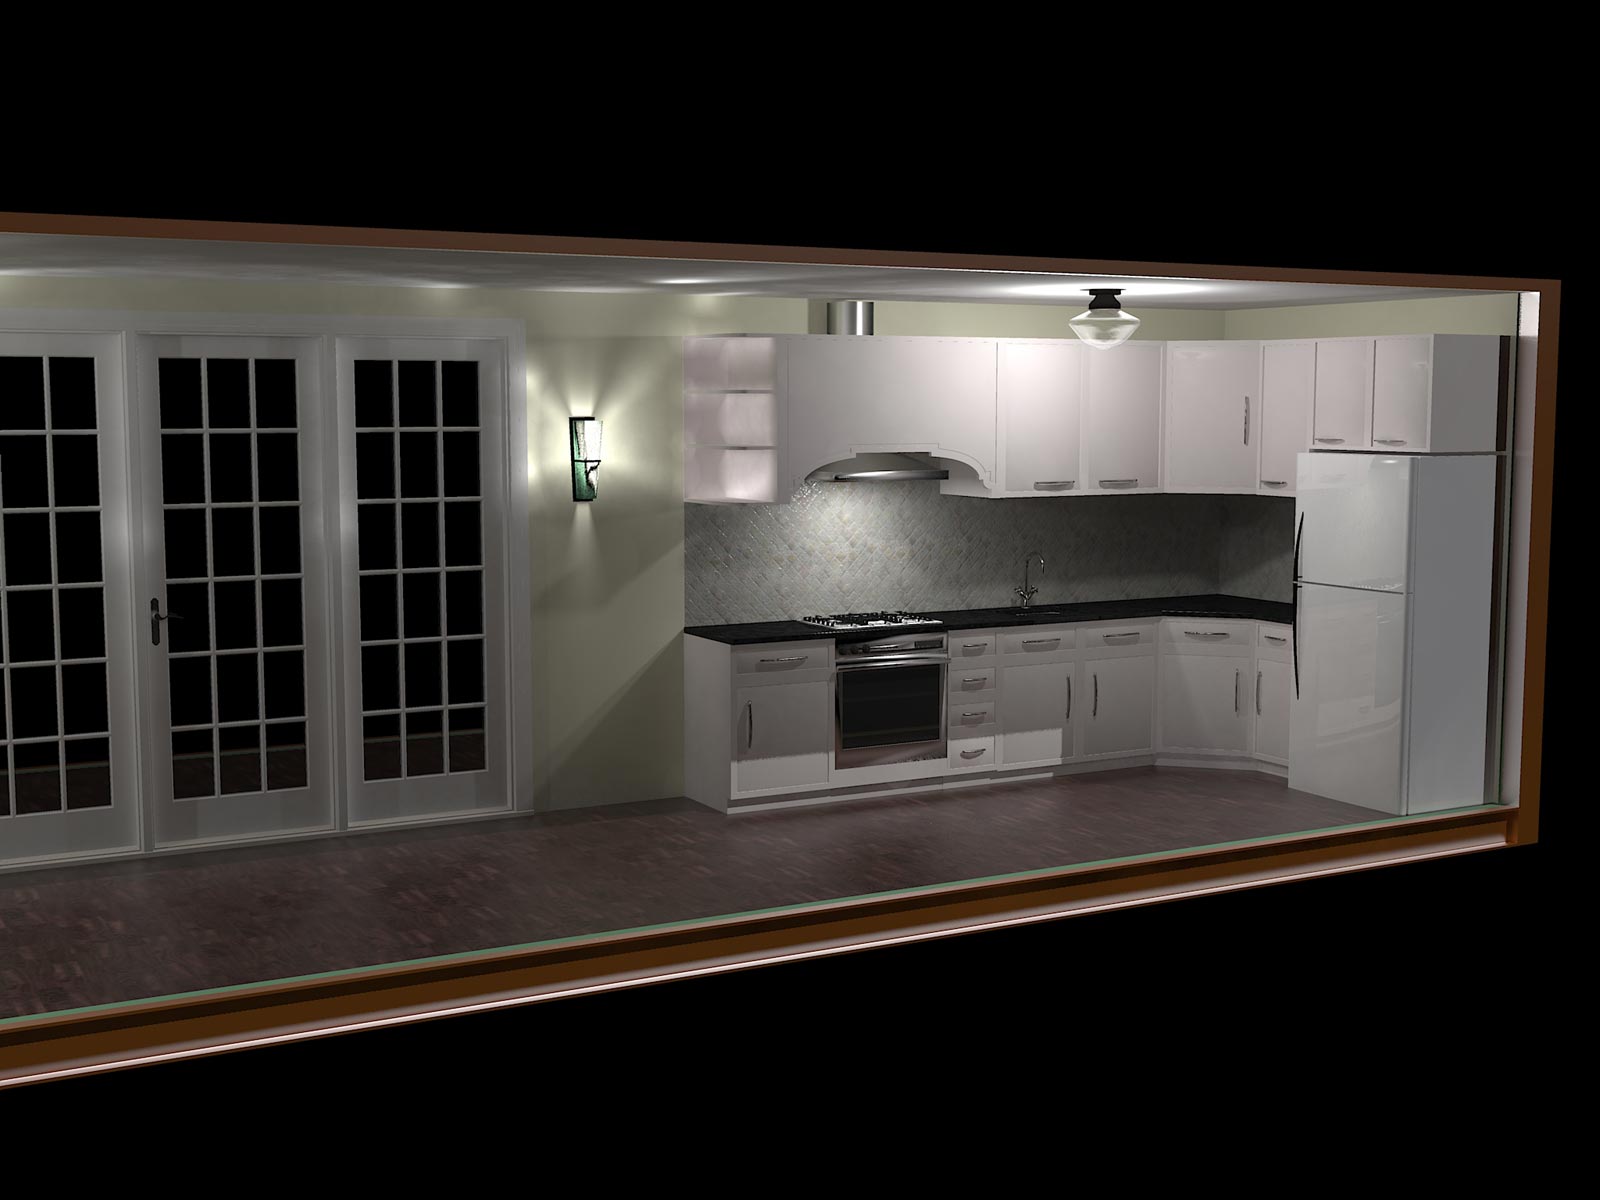 I purposely left out the molding over the cabinets as this is meant to be a partial piece to a larger house. Molding construction would depend on the overall design of what would be attached to this unit. I'm not sure about the light effect from the sconces by the door.